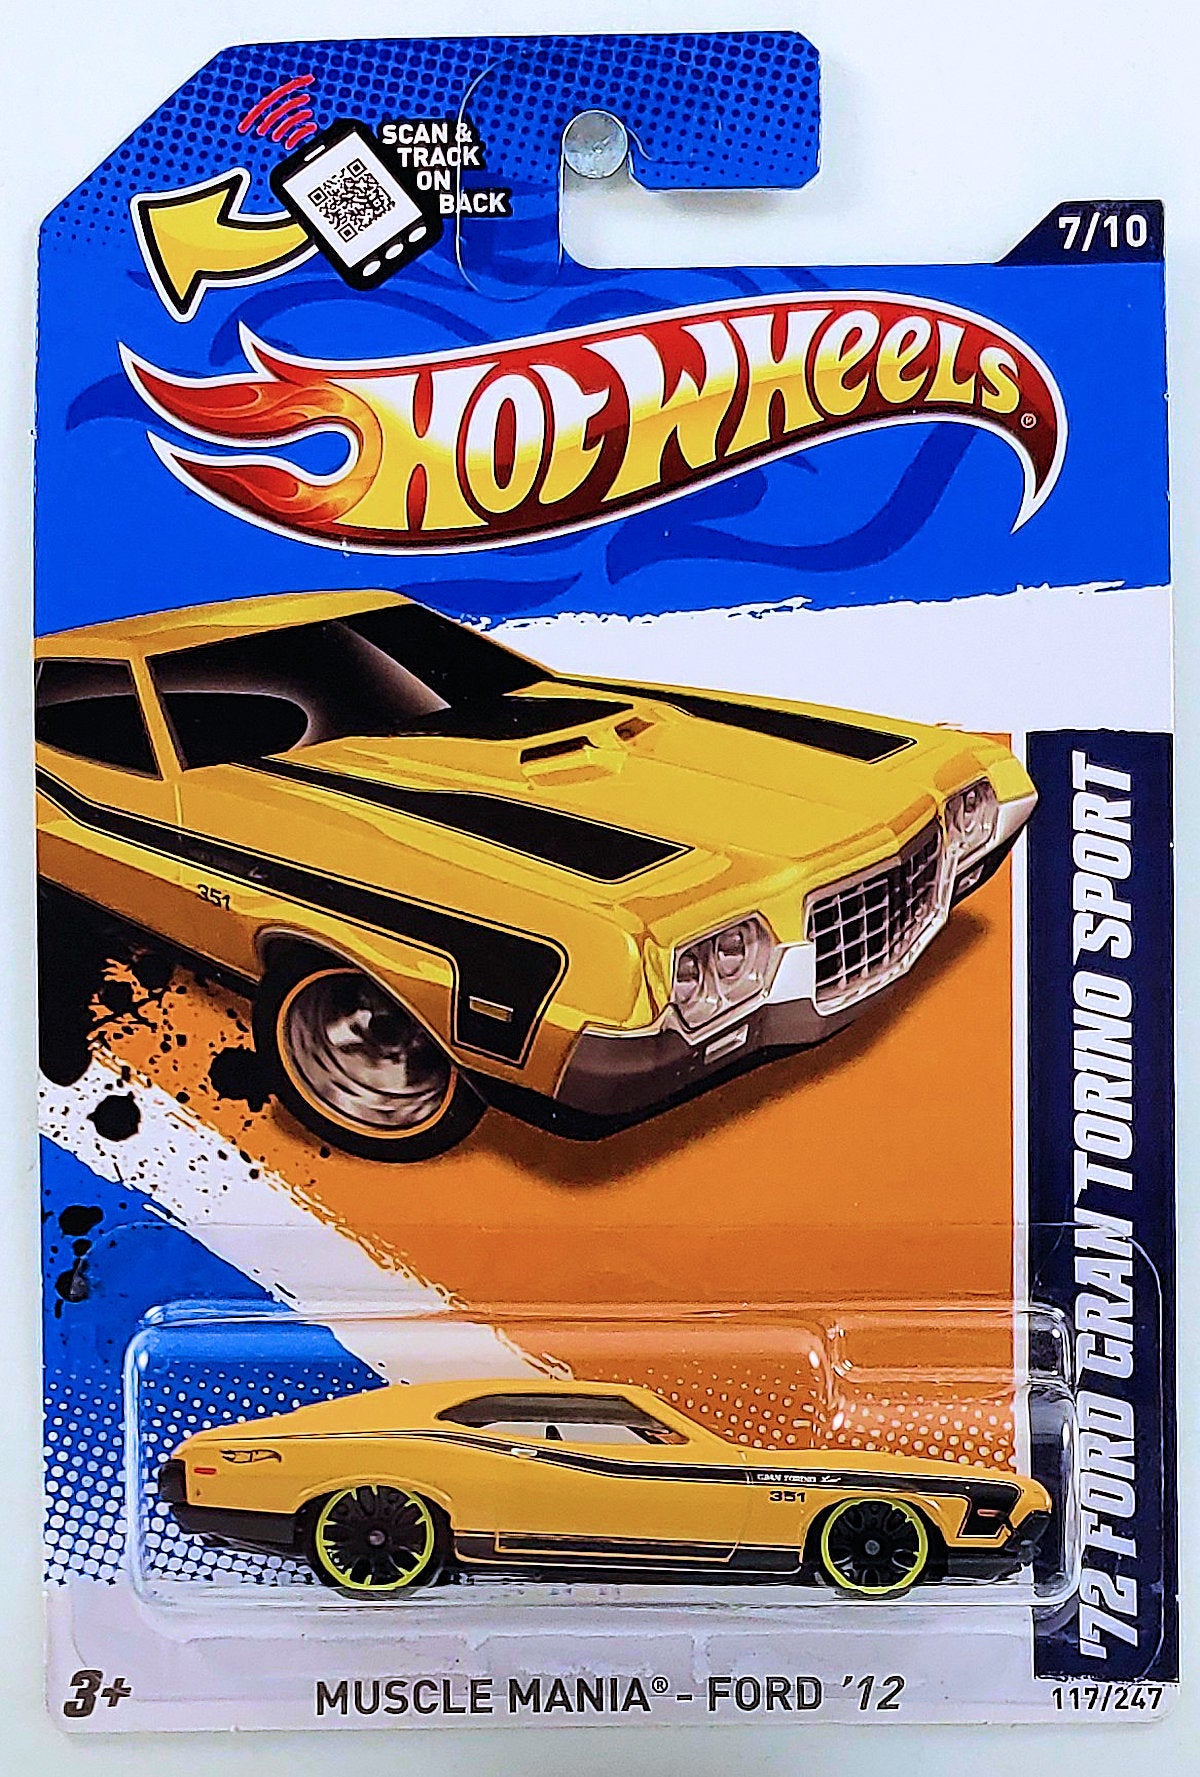 Hot Wheels 2012 - Collector # 117/247 - Muscle Mania / Ford 7/10 - '72 Ford Gran Torino Sport - Yellow Orange - USA